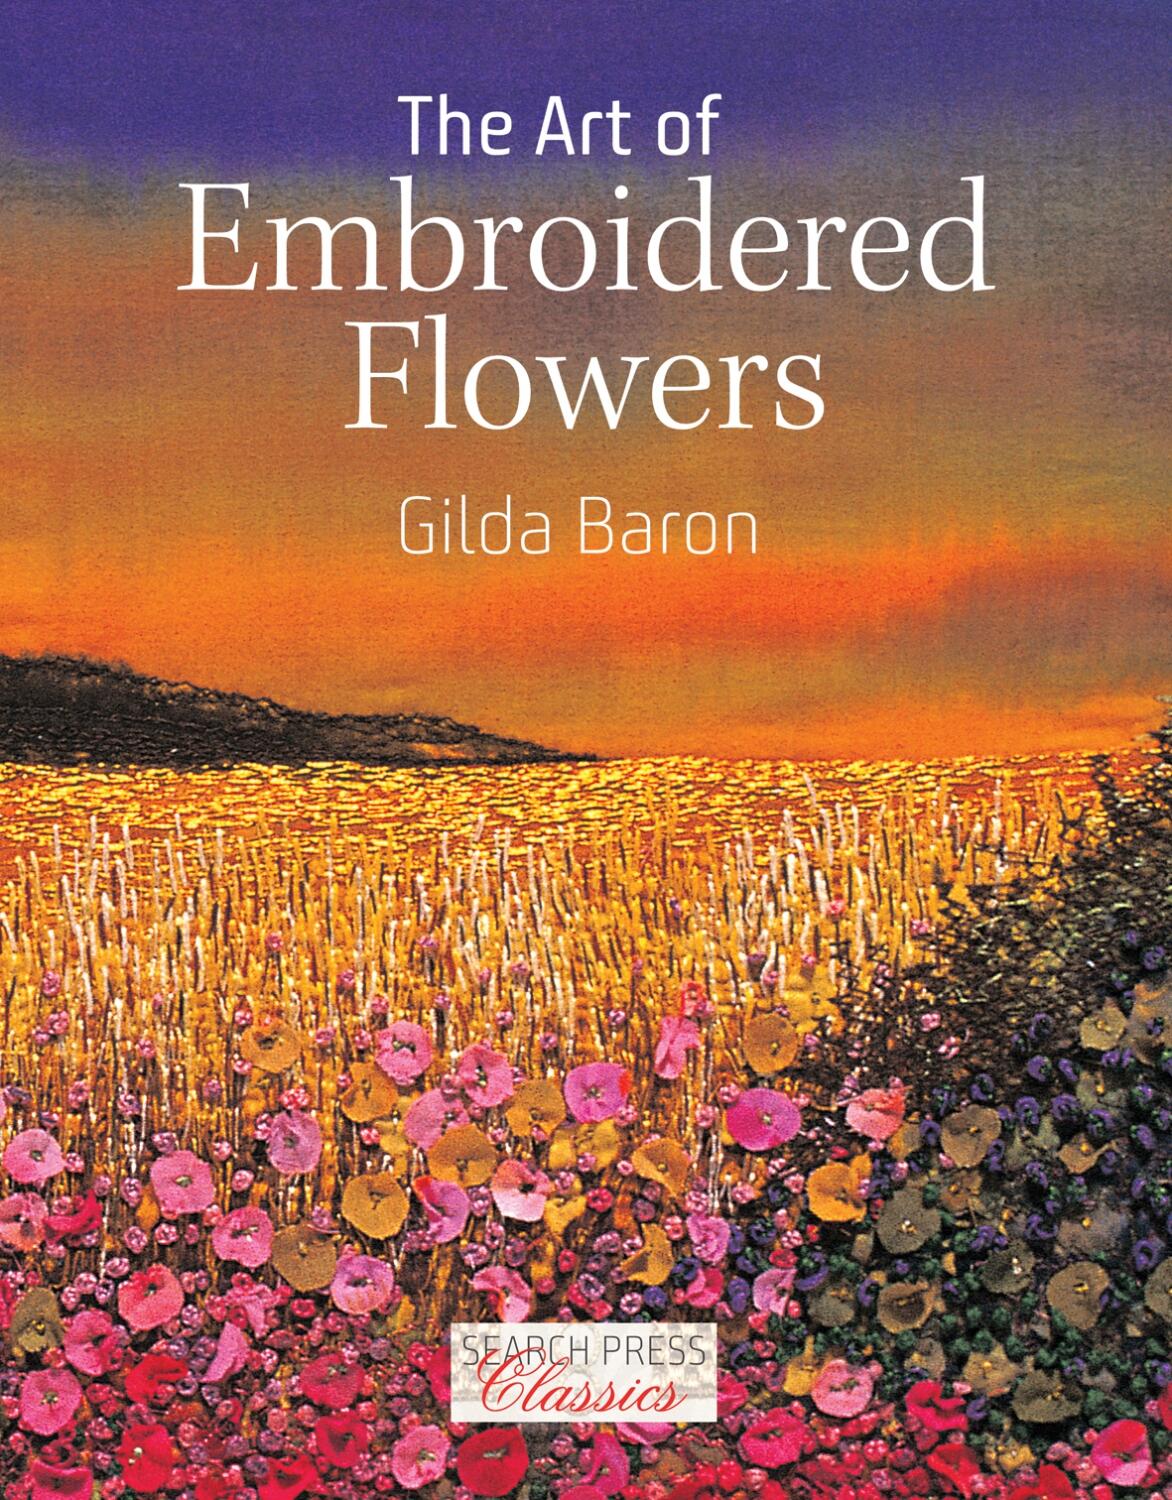 The Art of Embroidered Flowers by Gilda Baron